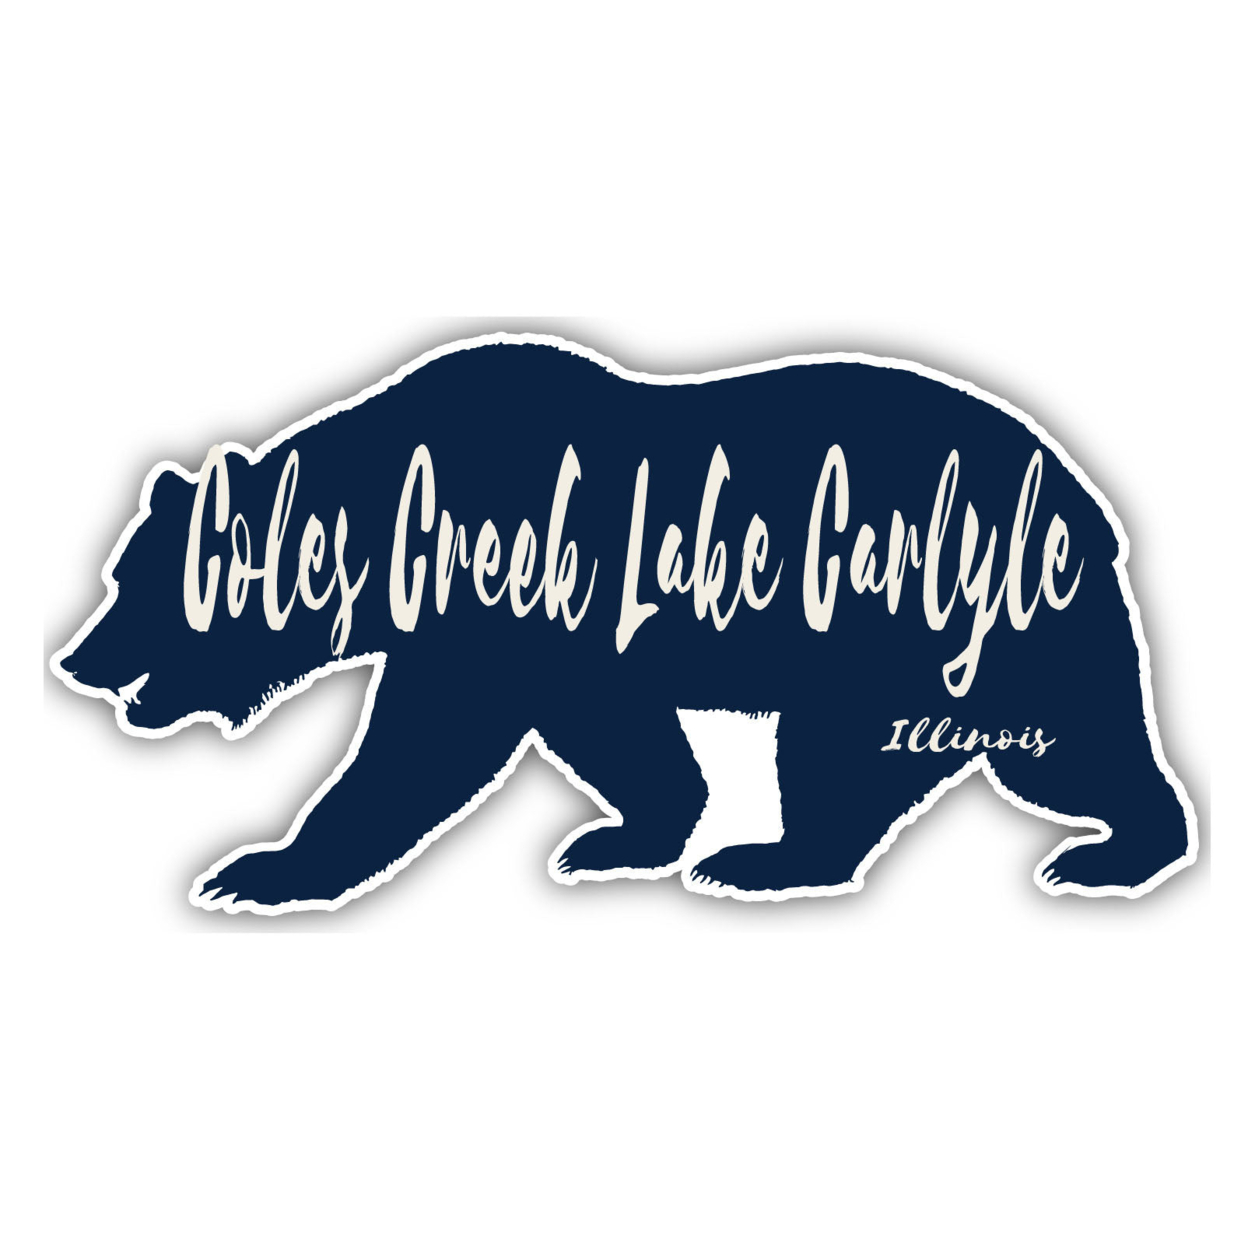 Coles Creek Lake Carlyle Illinois Souvenir Decorative Stickers (Choose Theme And Size) - 4-Pack, 12-Inch, Bear